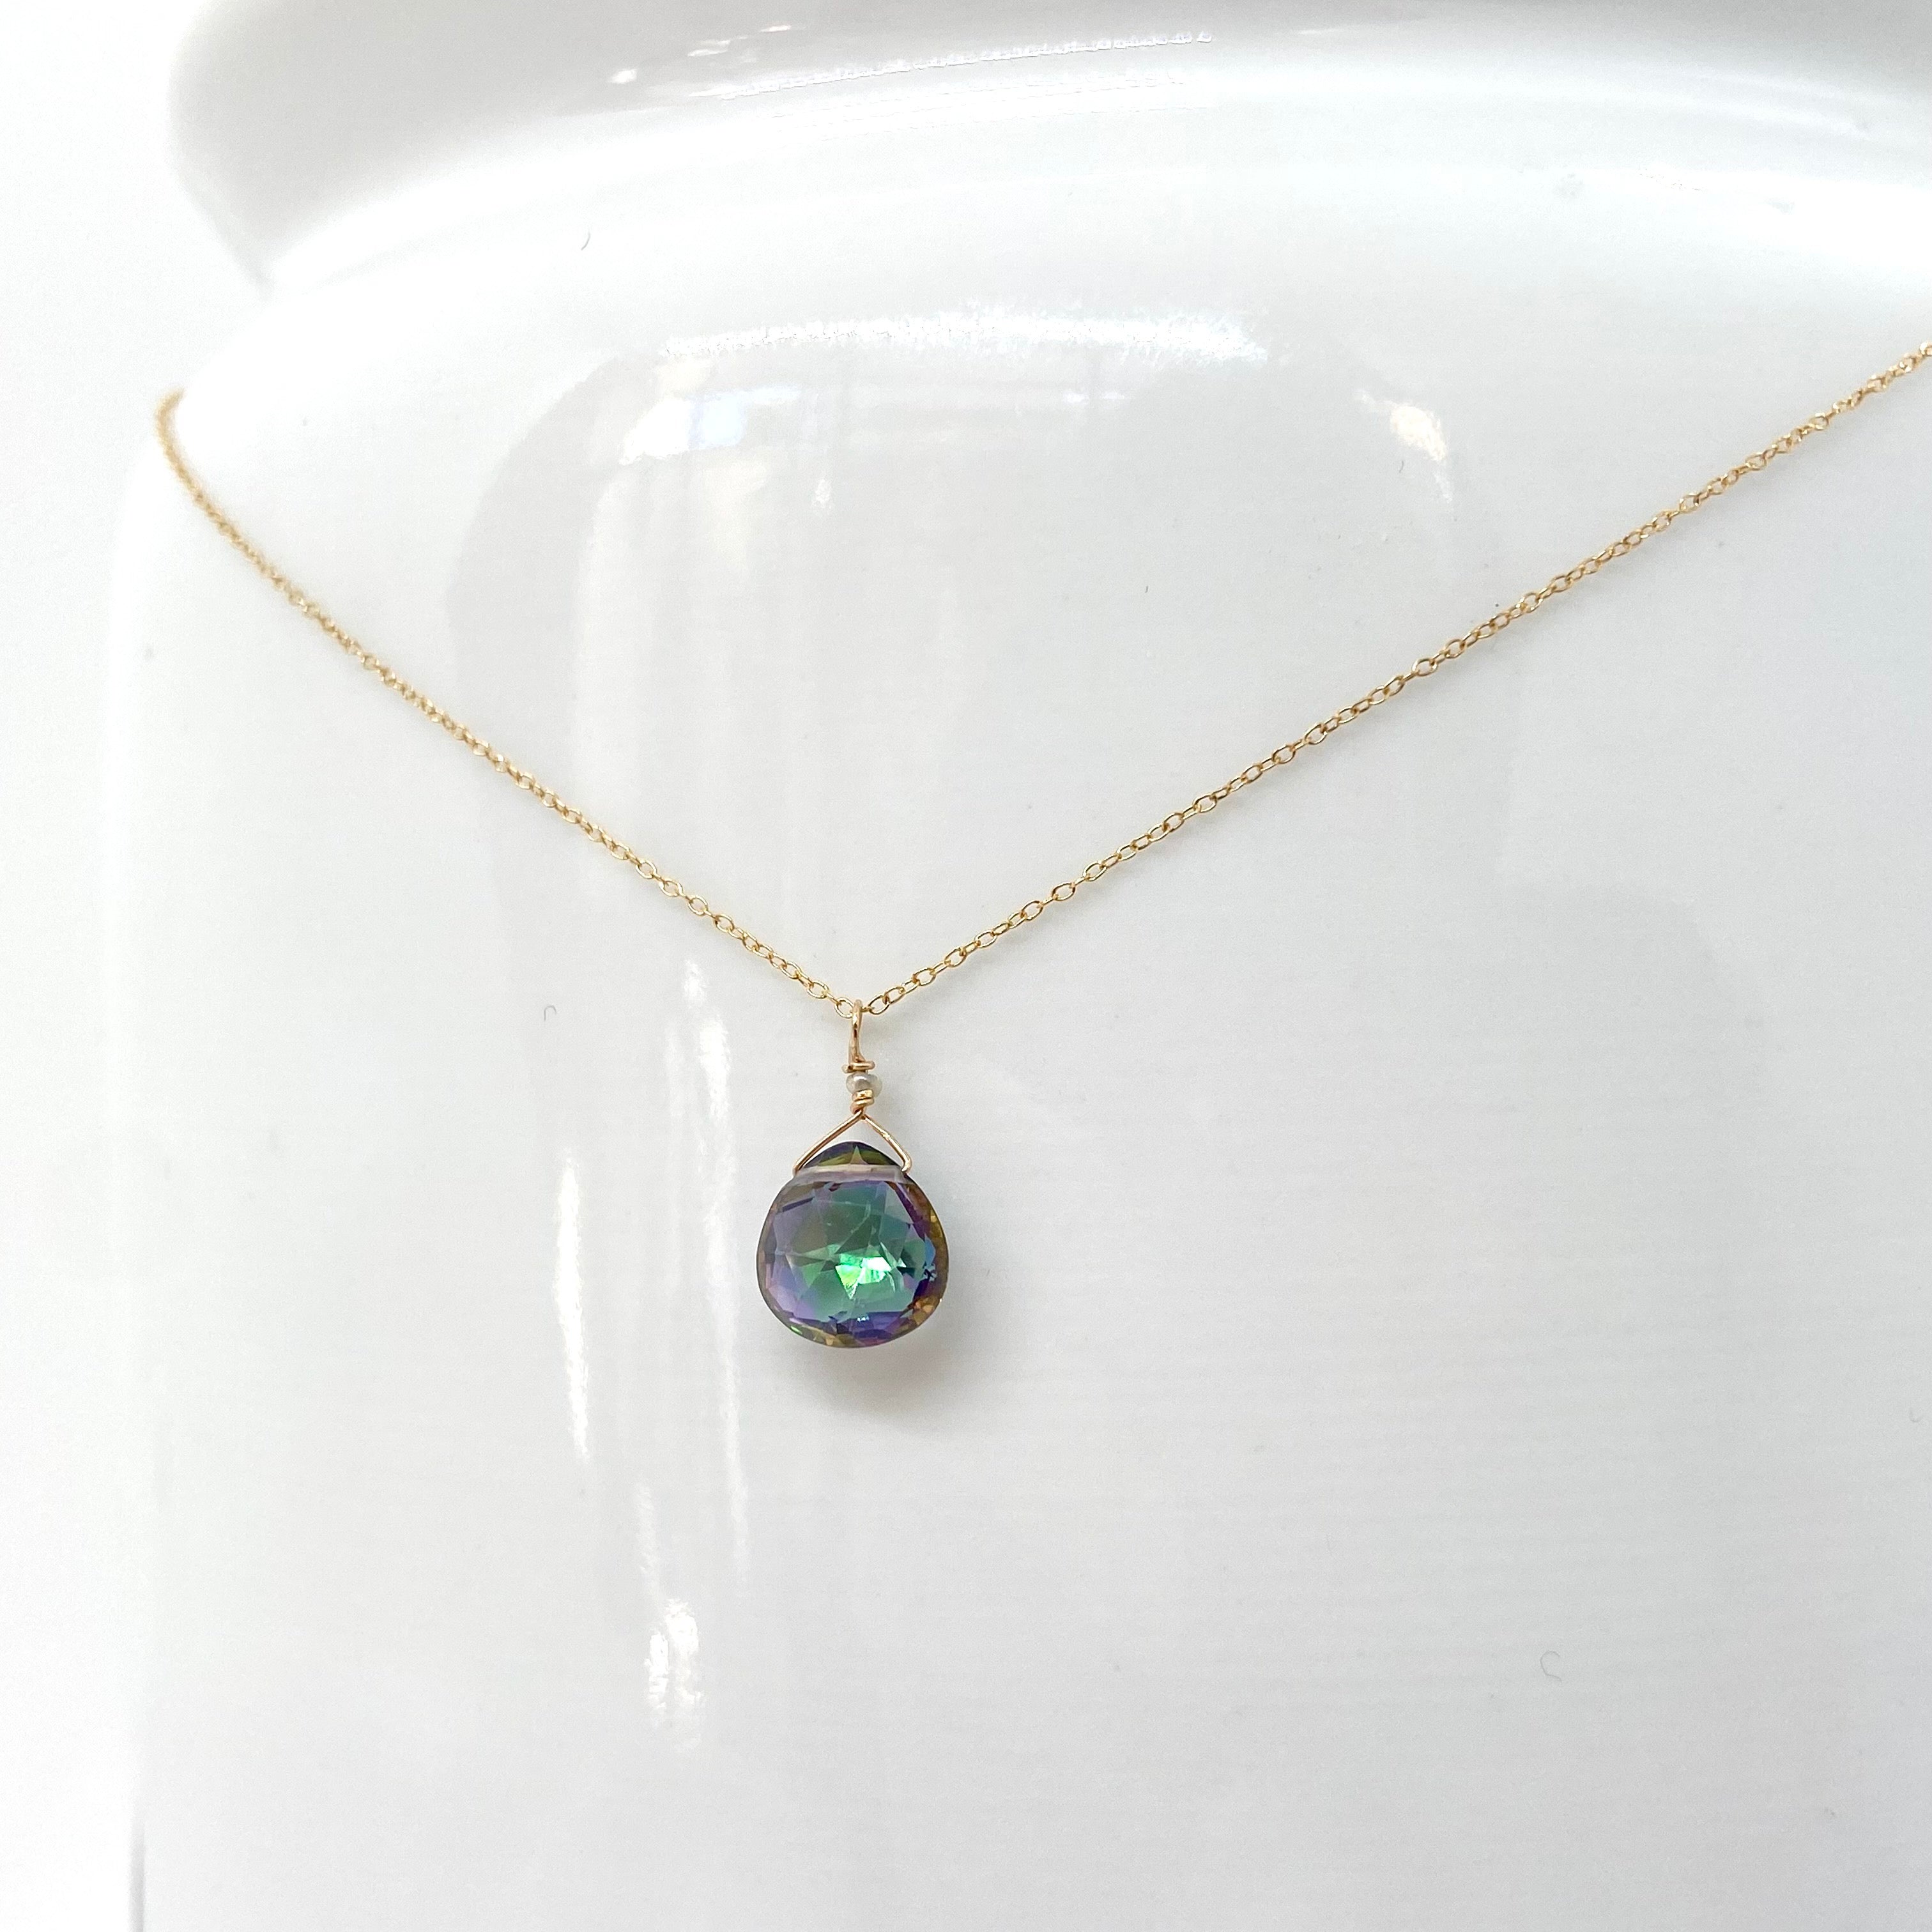 14k Gold Chain Necklace w/ Mystic Topaz & Freshwater Pearl